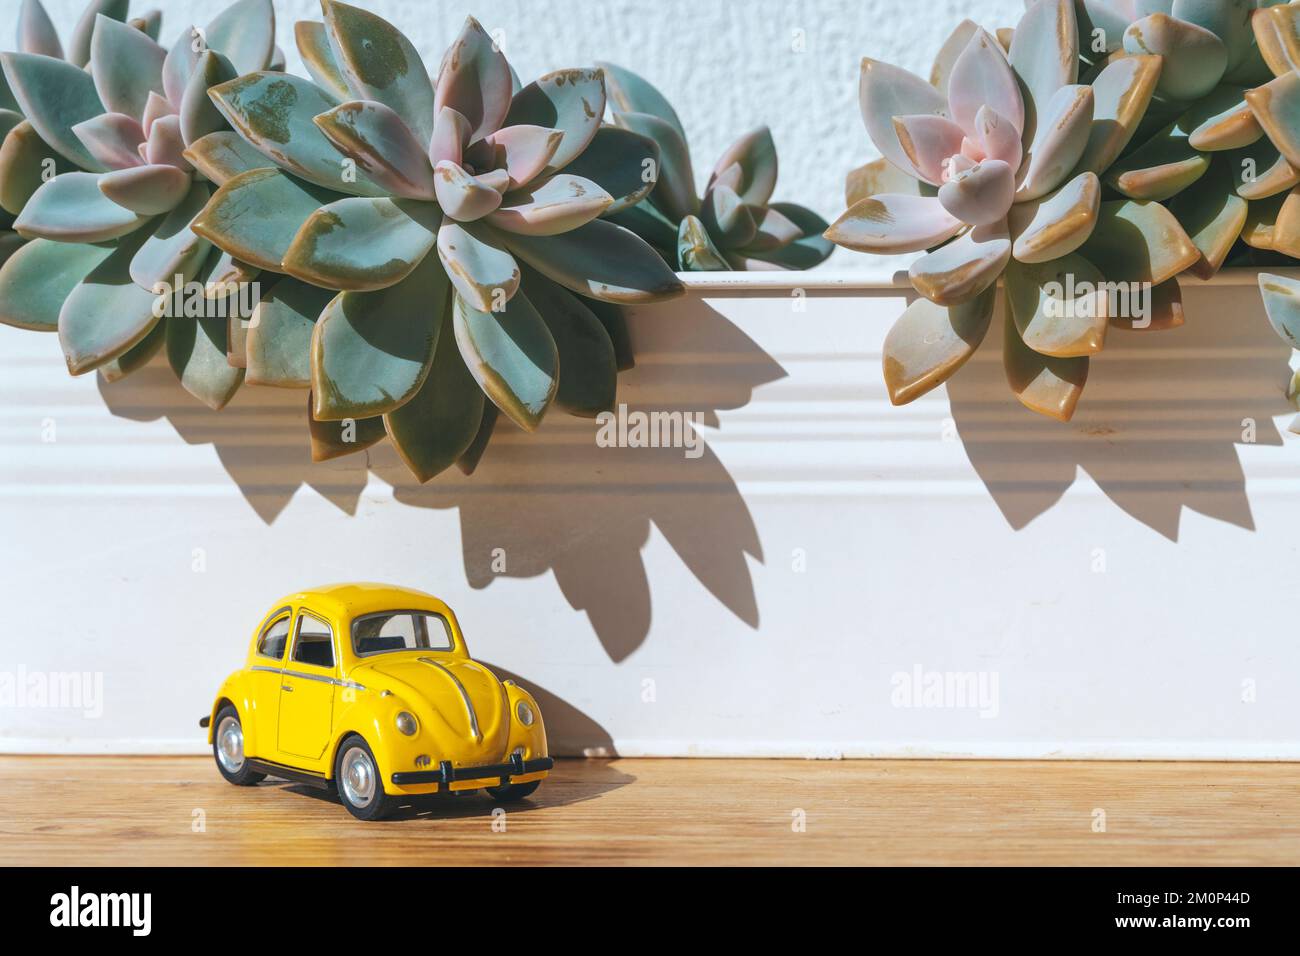 Travel car concept. Toy yellow car moves on against the backdrop of nature. Driving, adventure, discovery idea. High quality photo Stock Photo